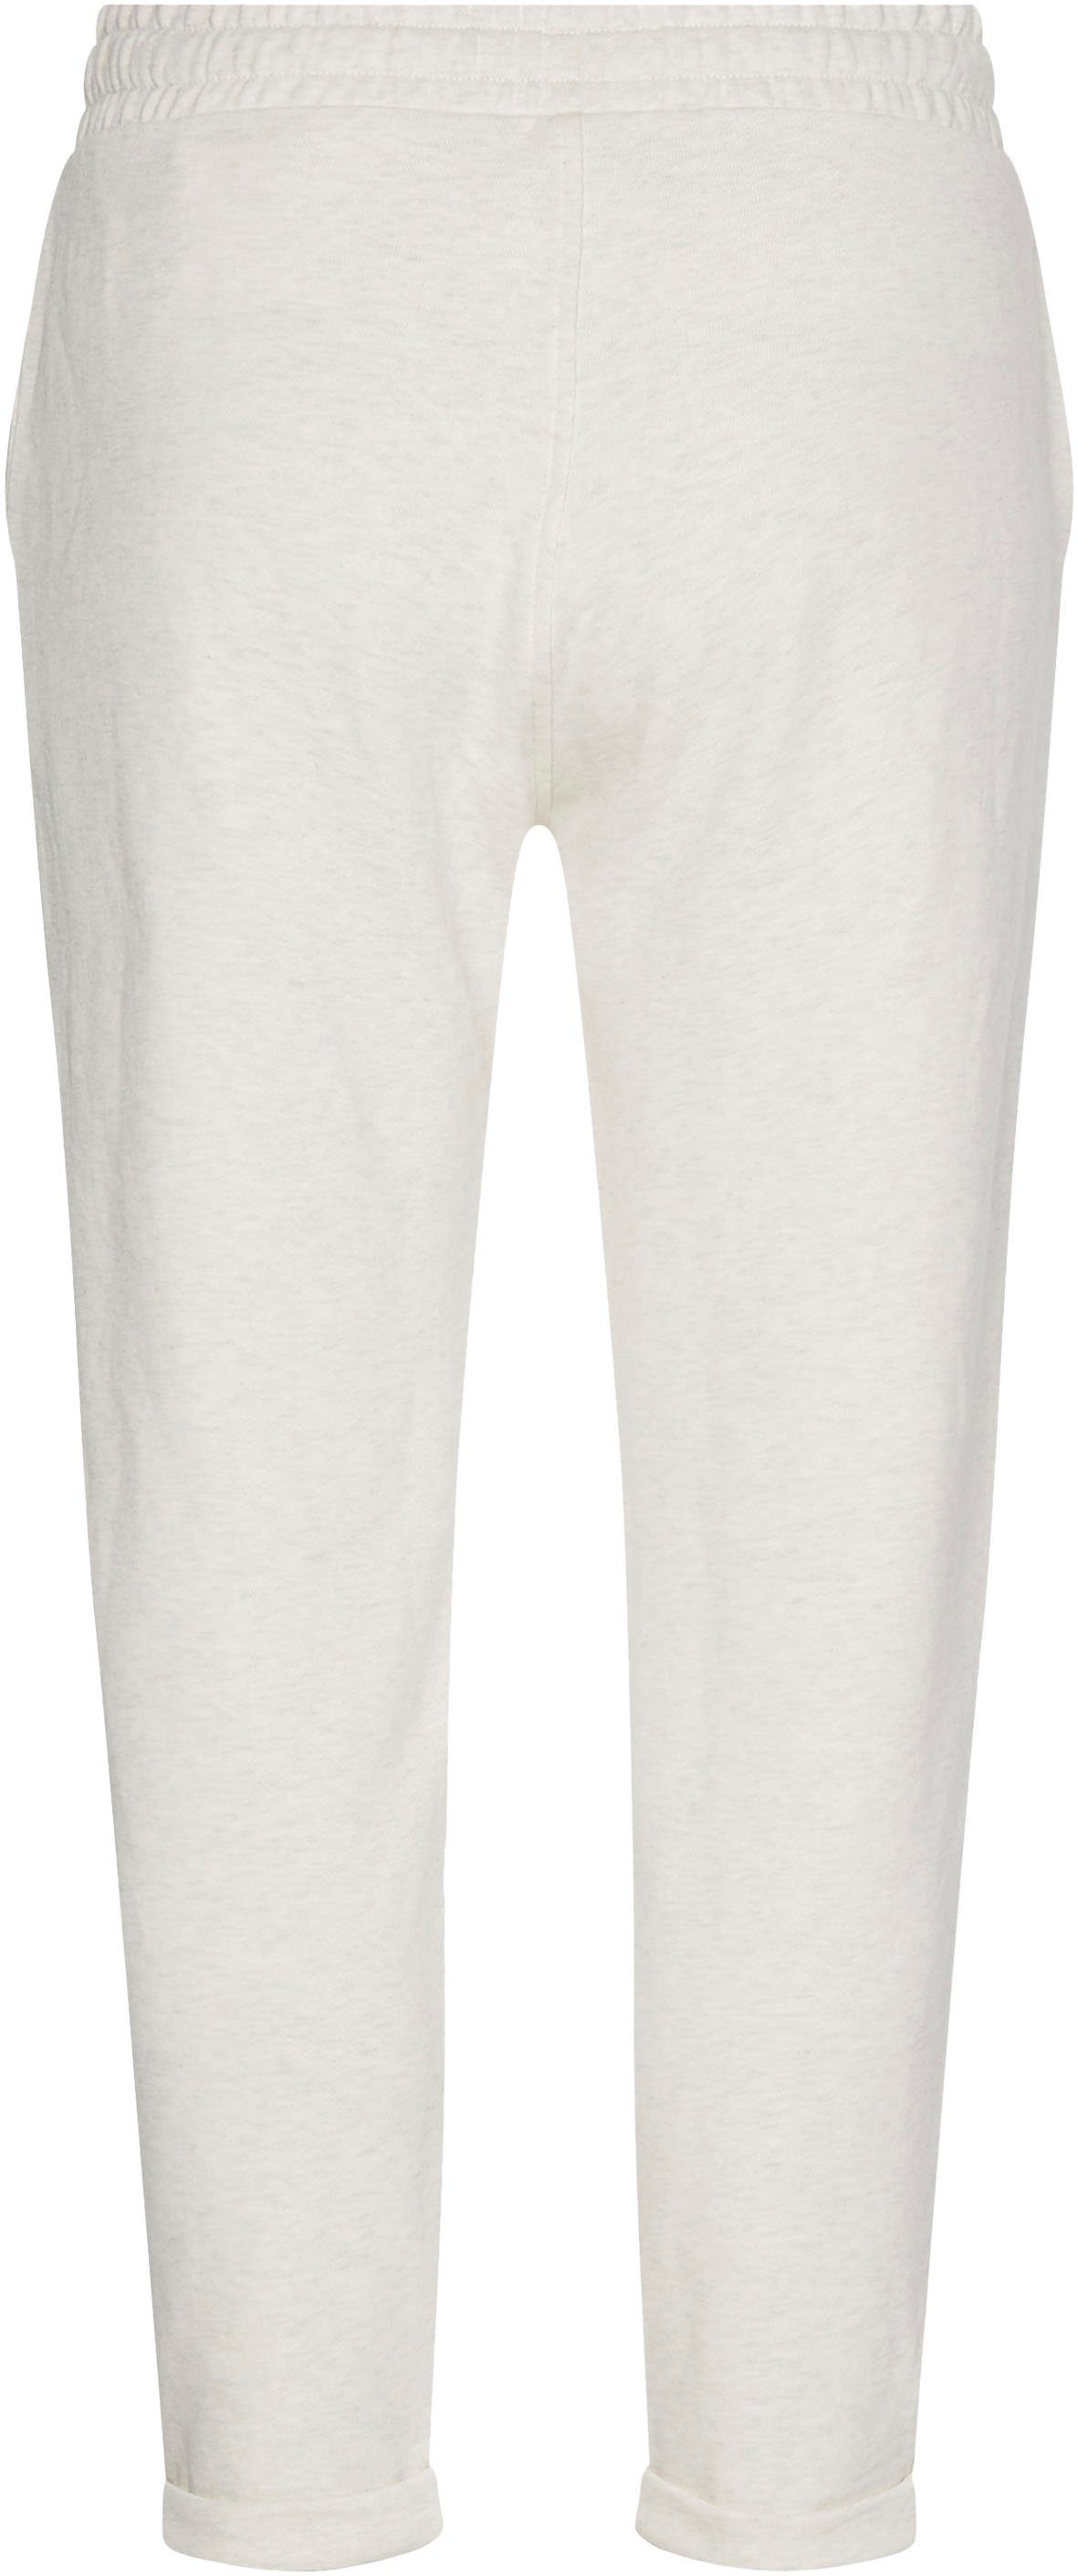 TAPERED Hilfiger ROUNDALL Hilfiger NYC Markenlabel Tommy Tommy Sweatpants SWEATPANTS mit White-Heather